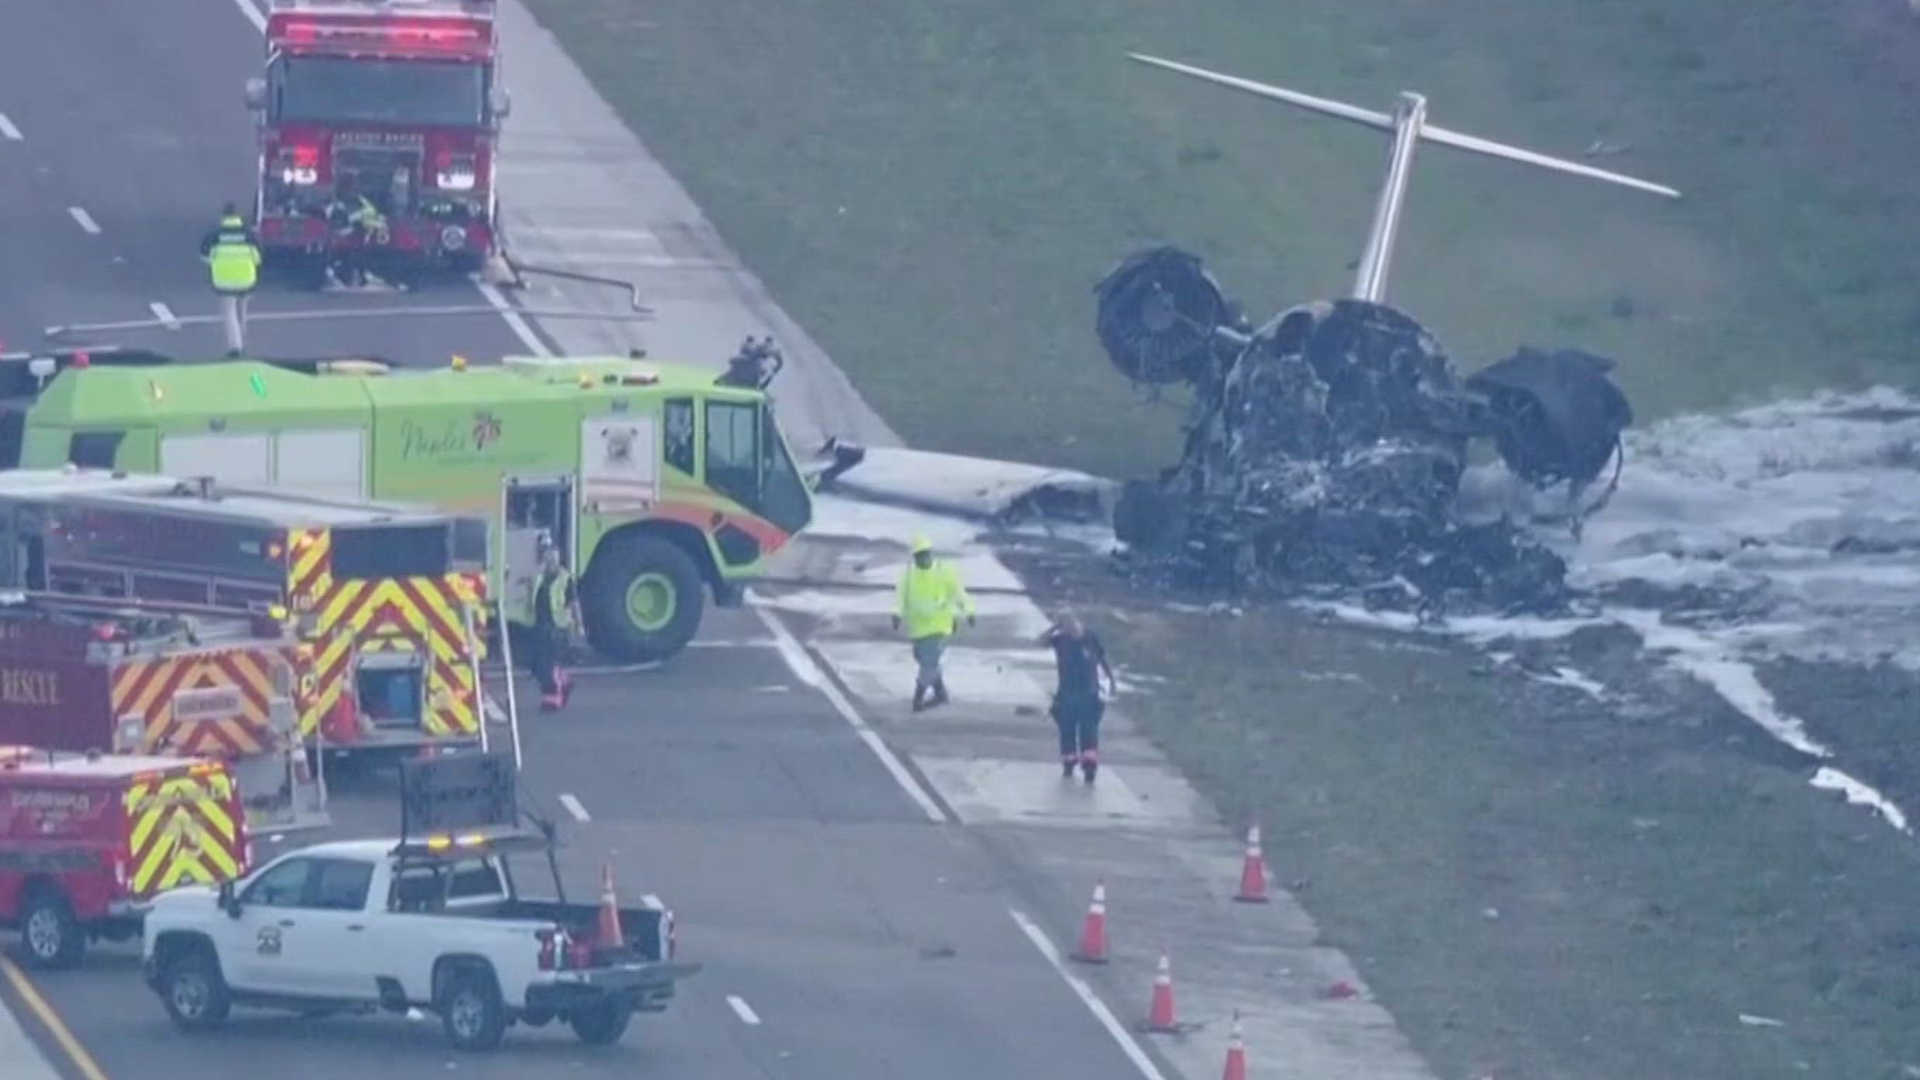 Air Traffic Control told CBS affiliate WINK that two engines failed on the twin-engine jet plane before the crash.